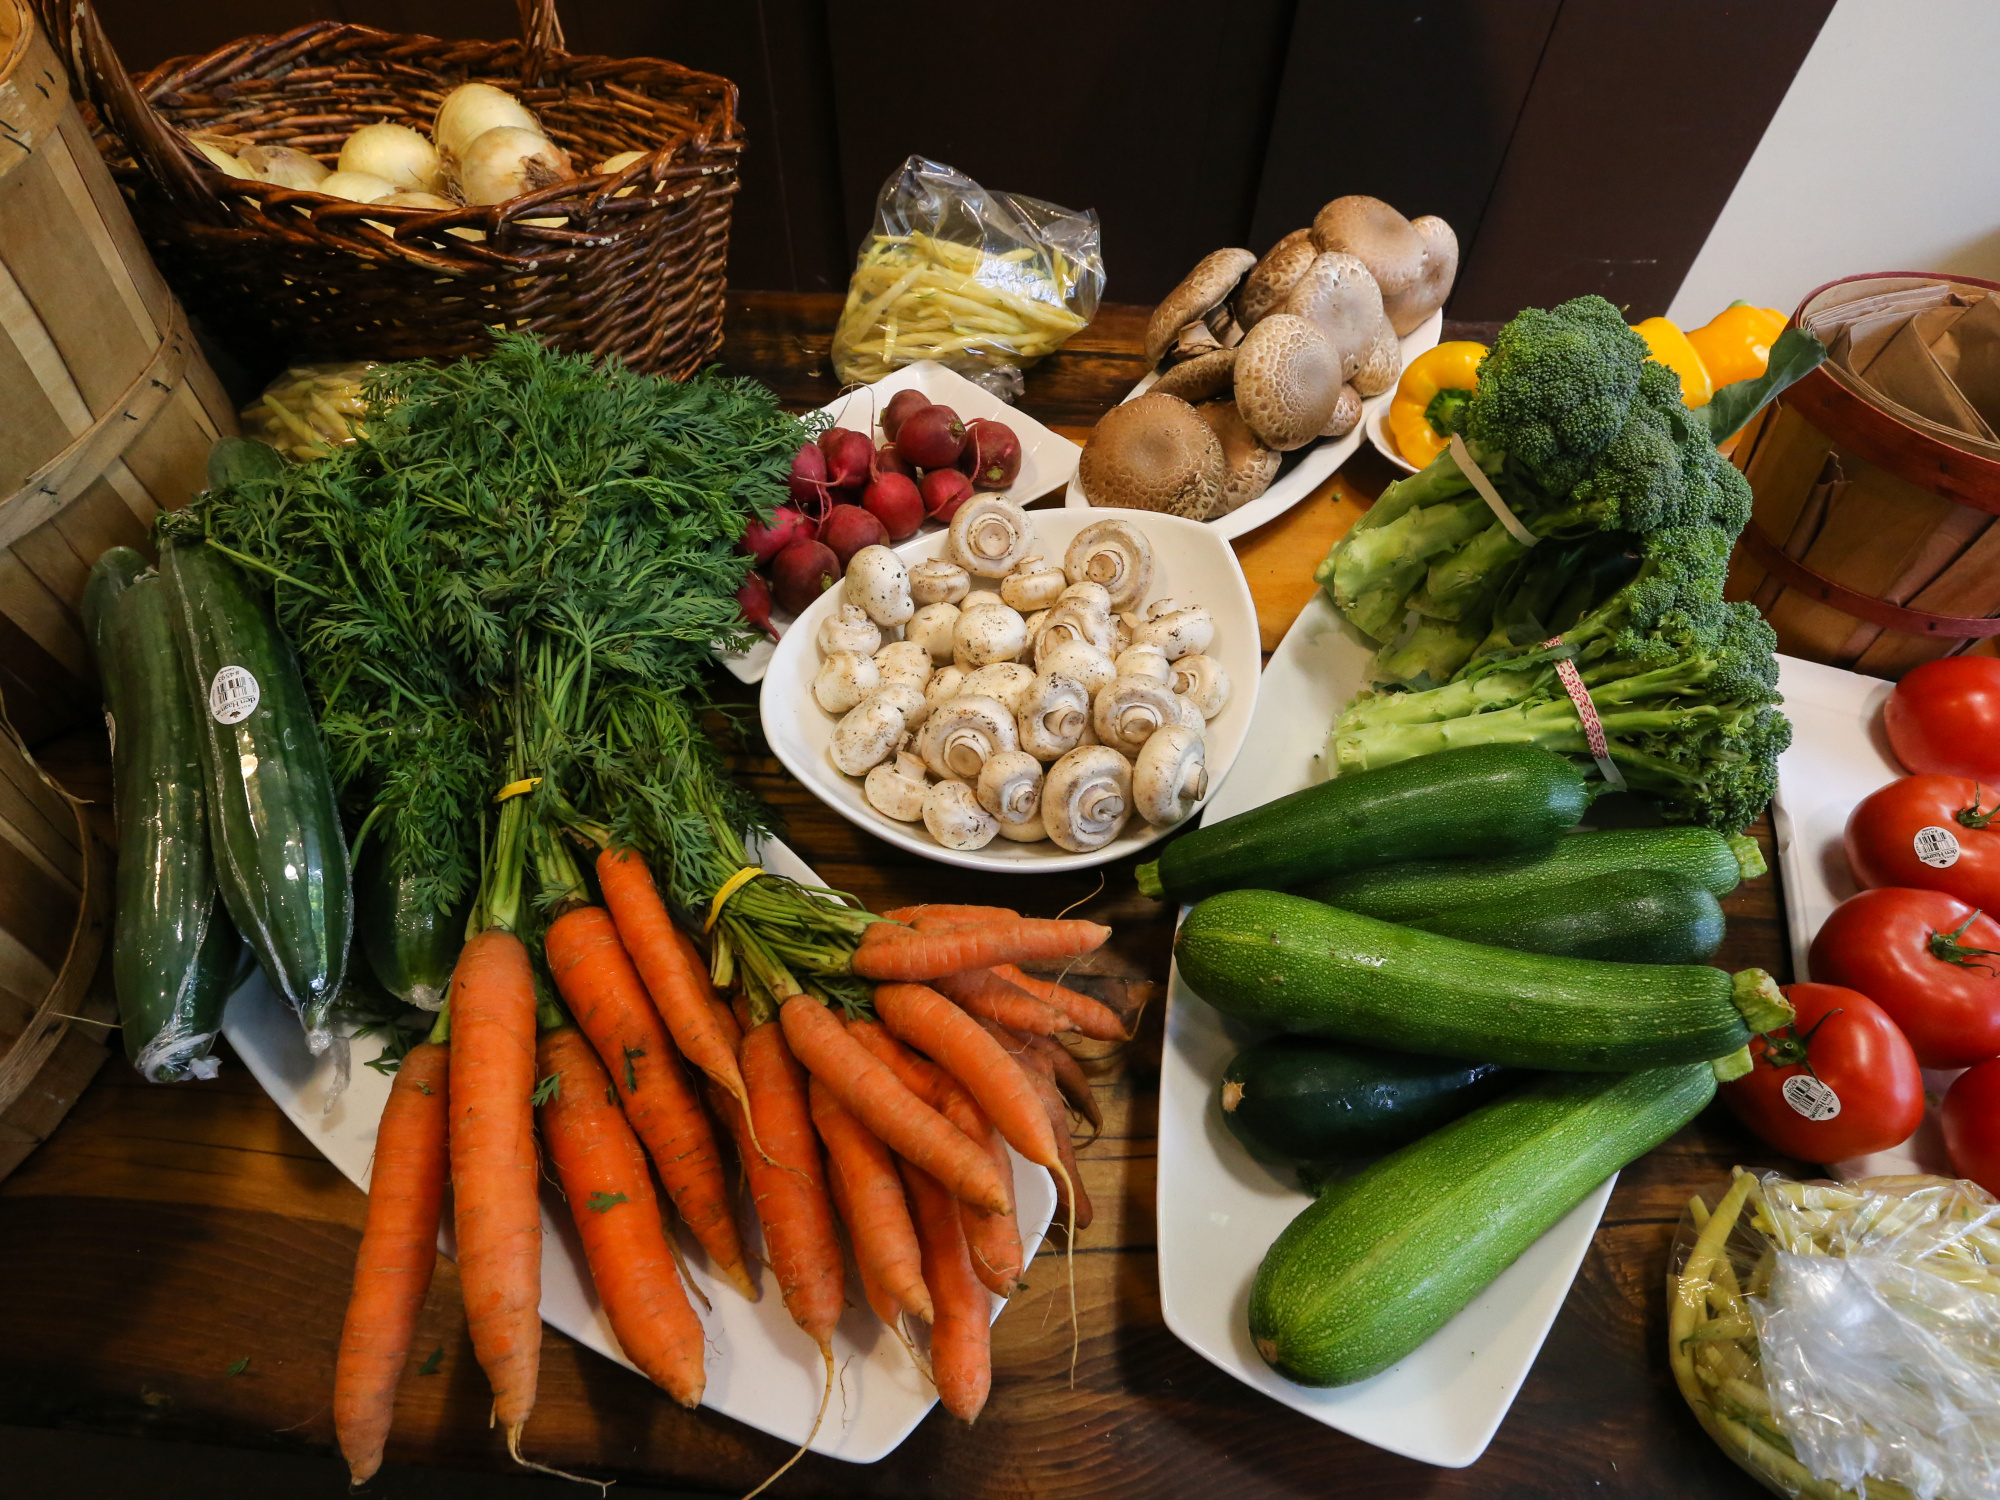 photo showing a range of local produce including carrots, cucumber, broccoli and tomato